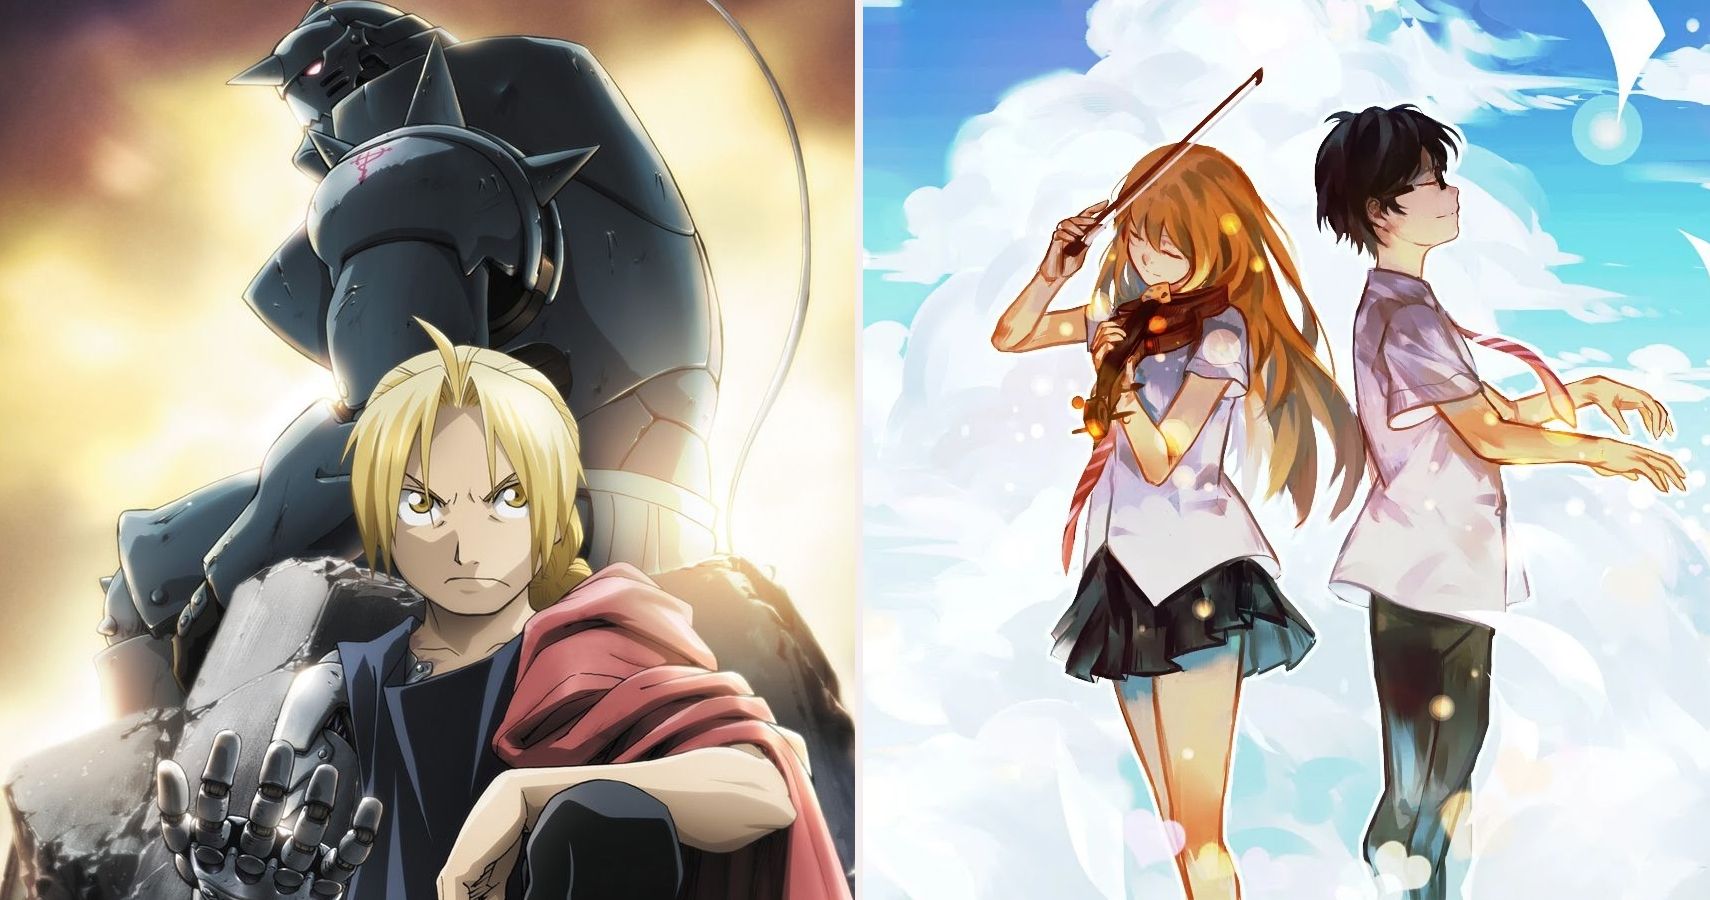 The 10 Best Anime Available On Netflix In 2020 (According To IMDb)